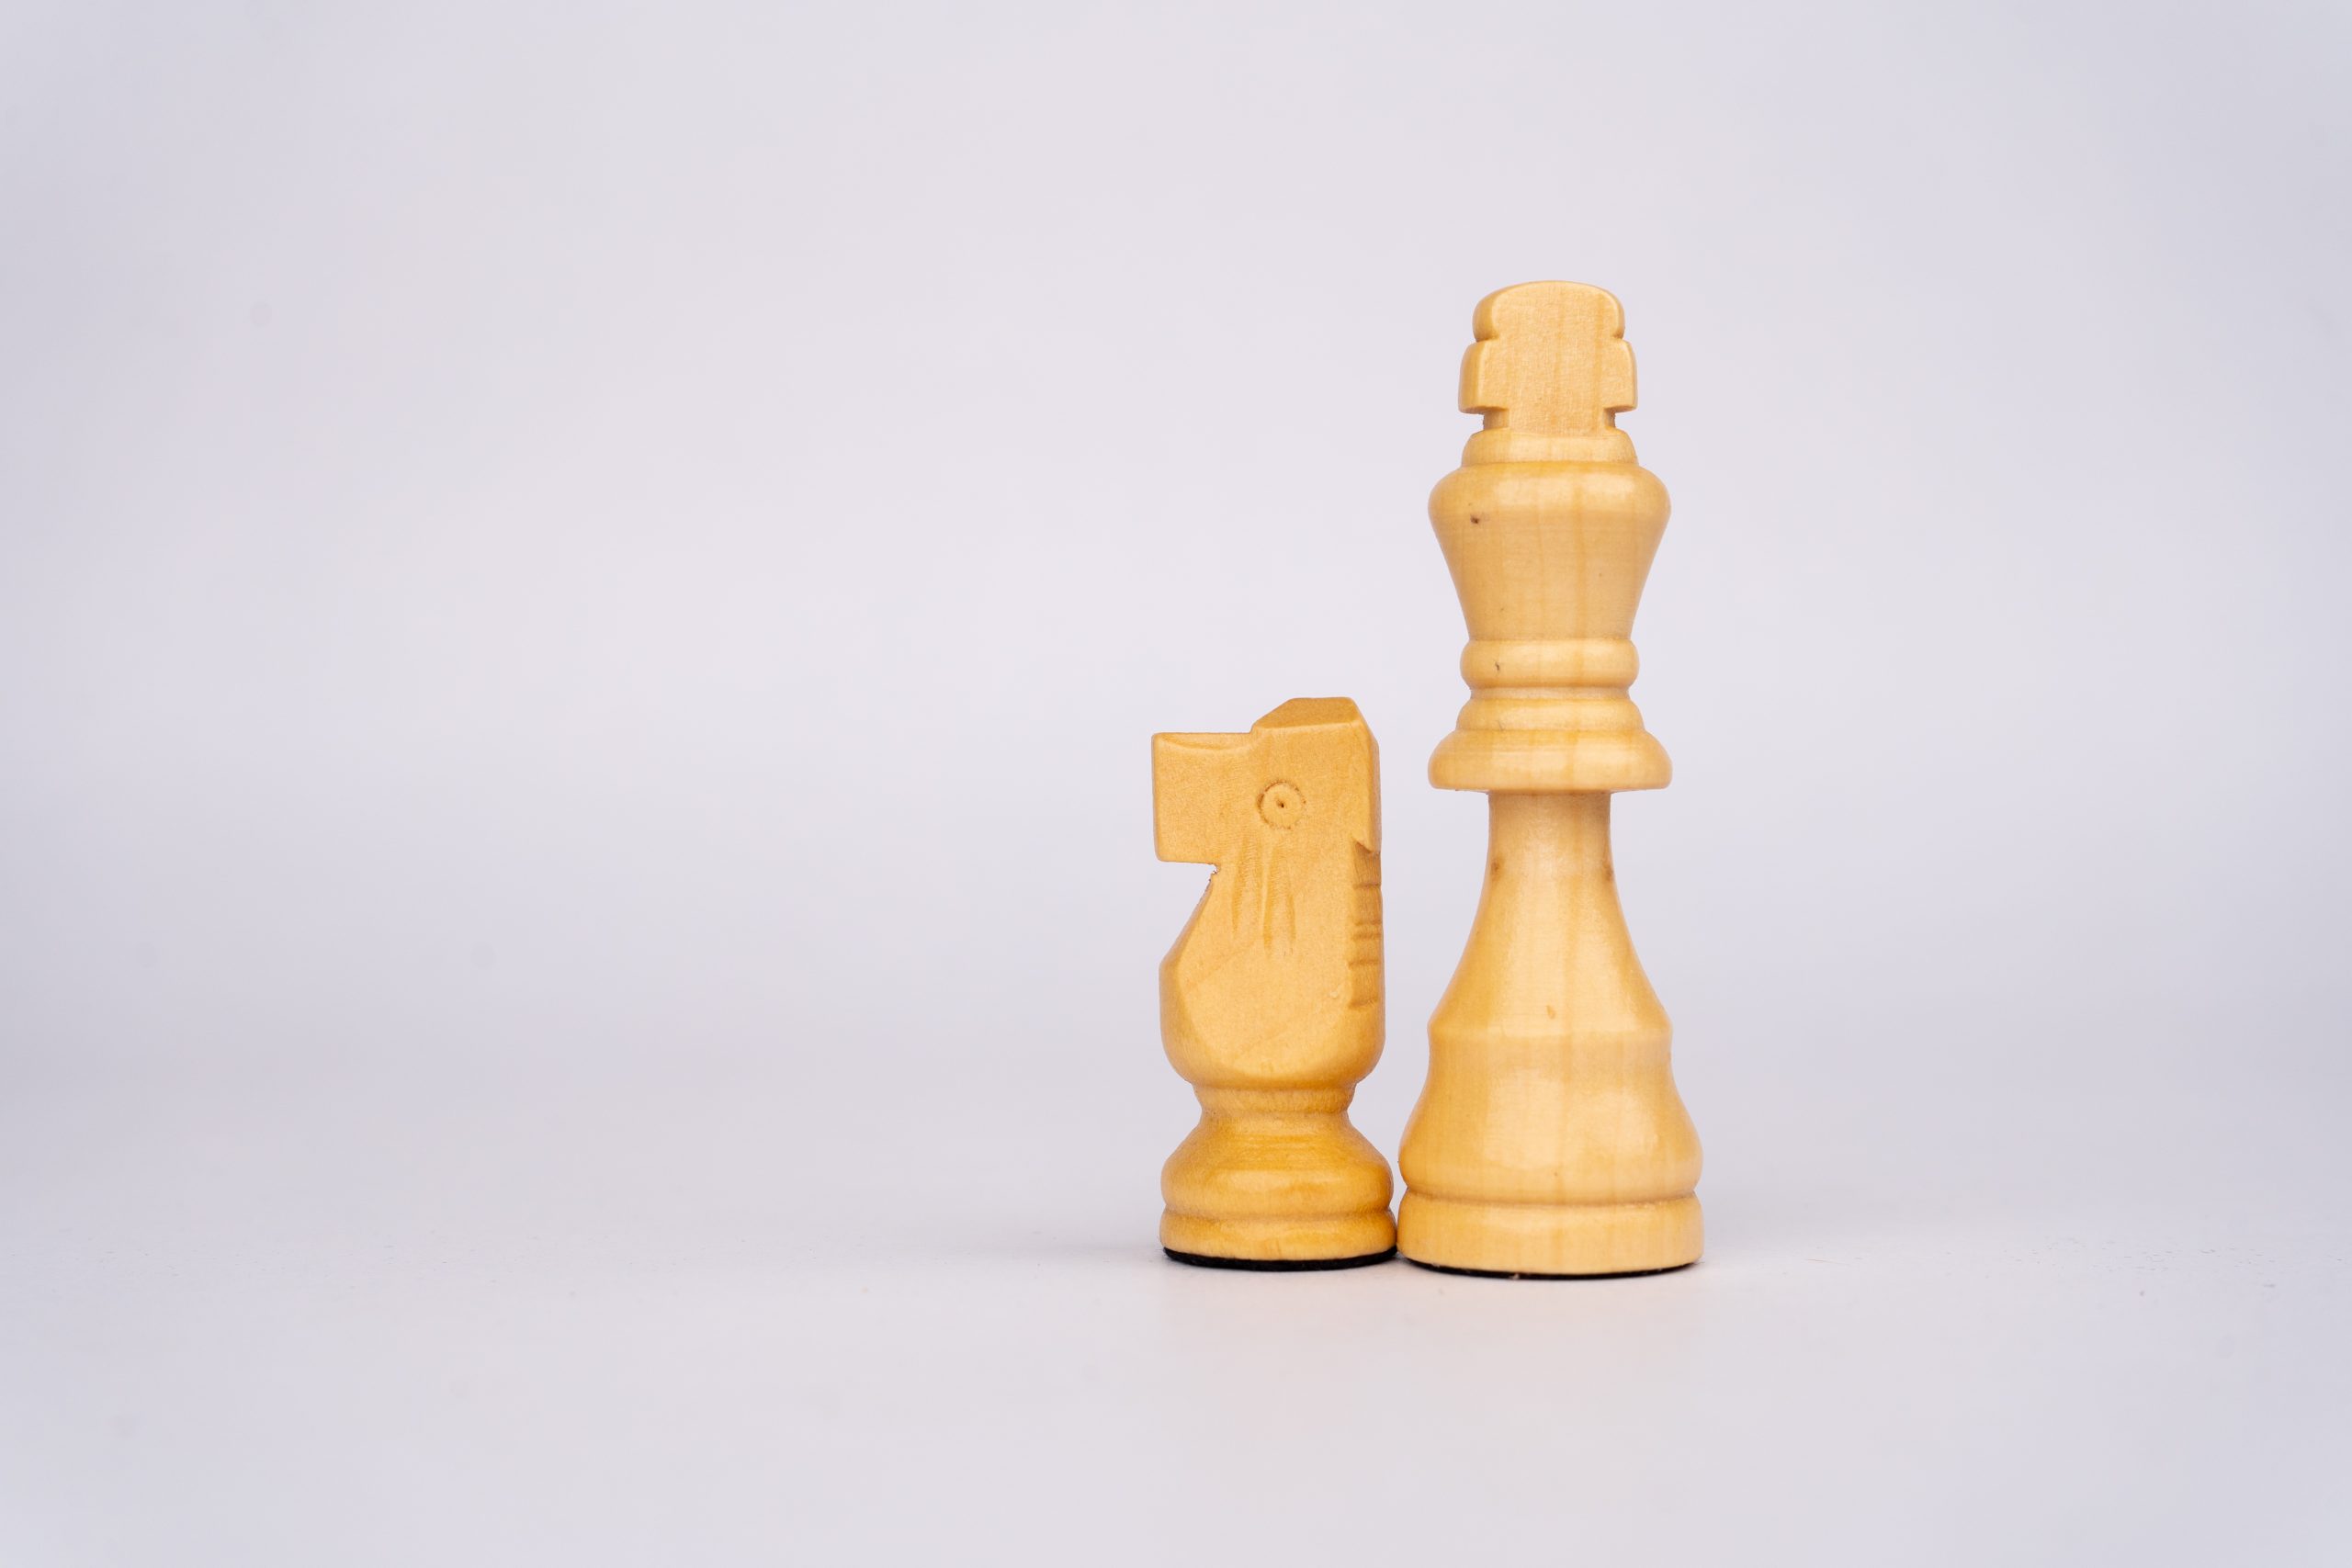 chess king and knight pegs